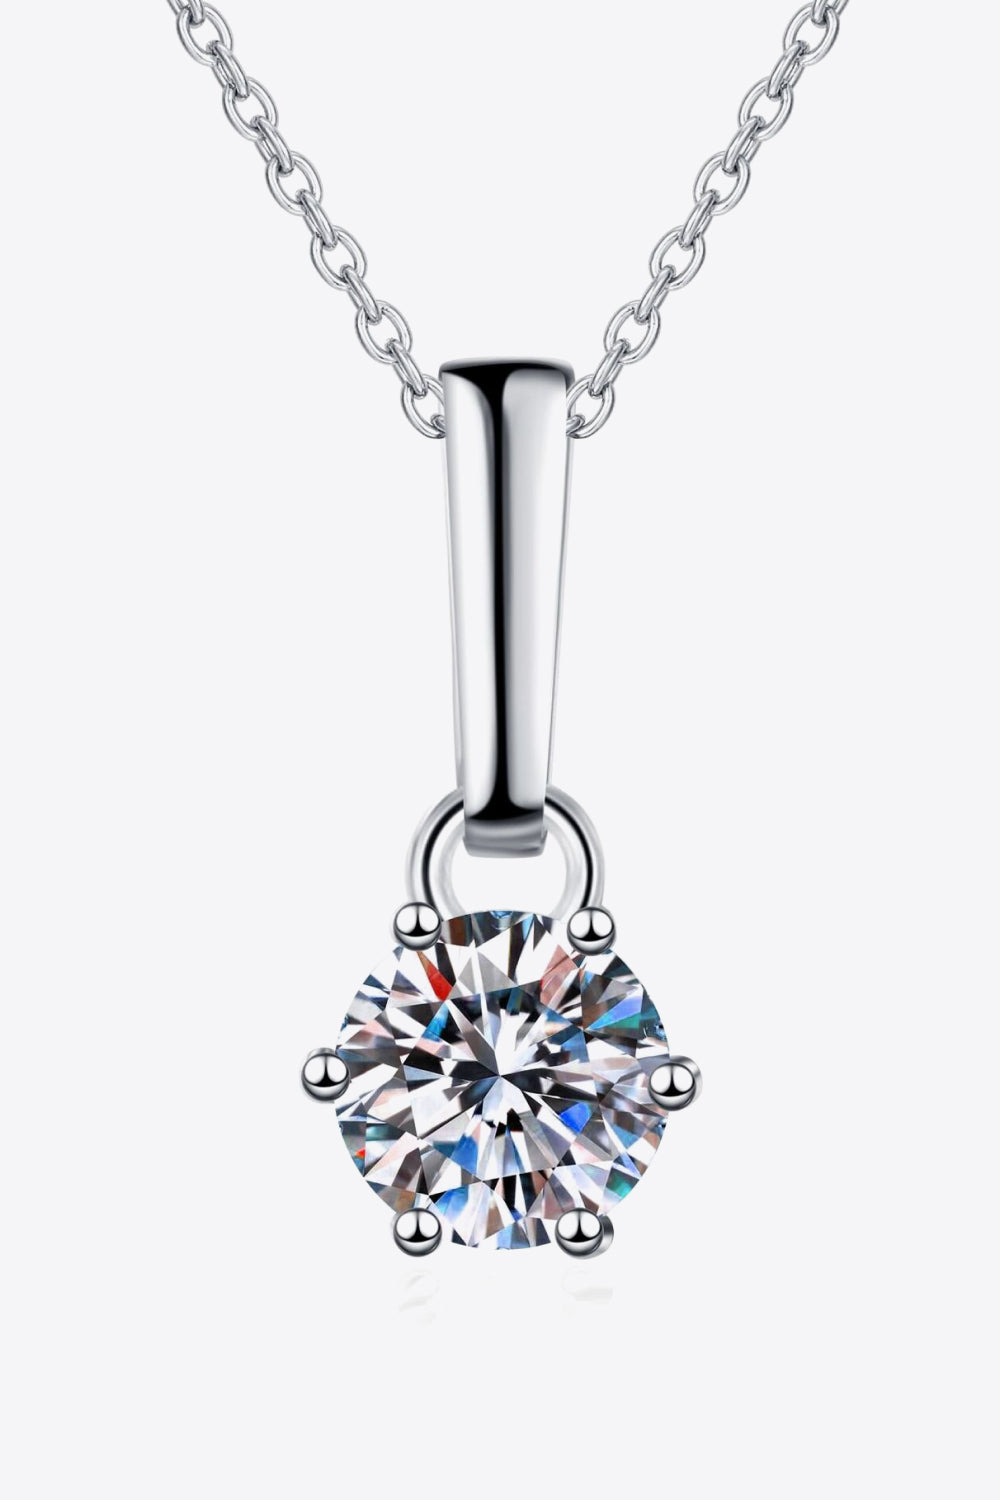 1 Carat Moissanite 925 Sterling Silver Chain-Link Necklace - Dash Trend